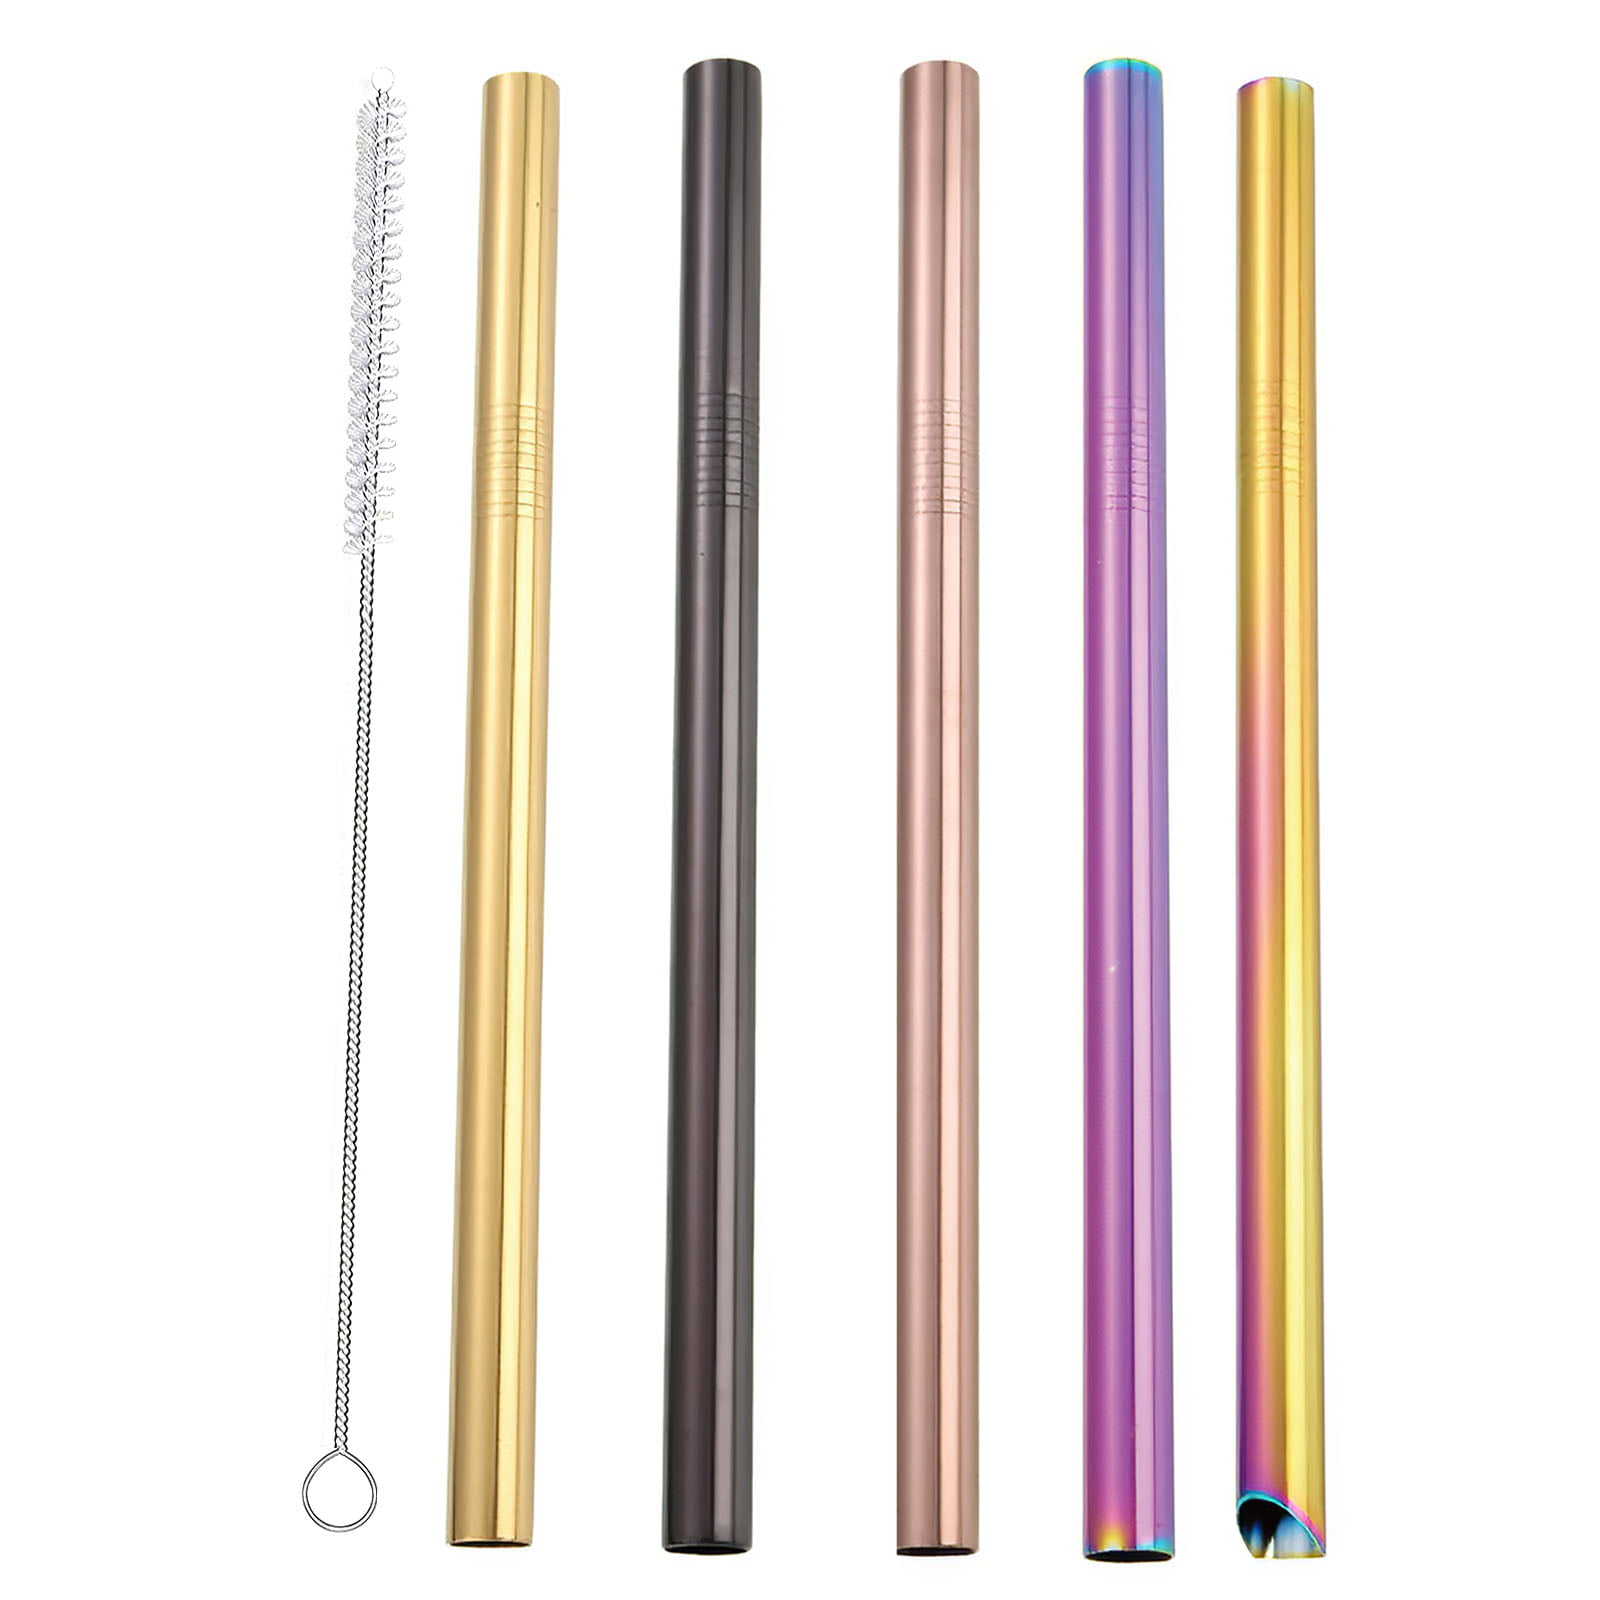 5X Reusable Stainless Steel Drinking Straws Big 1.2cm Wide Straws For Smoothies 